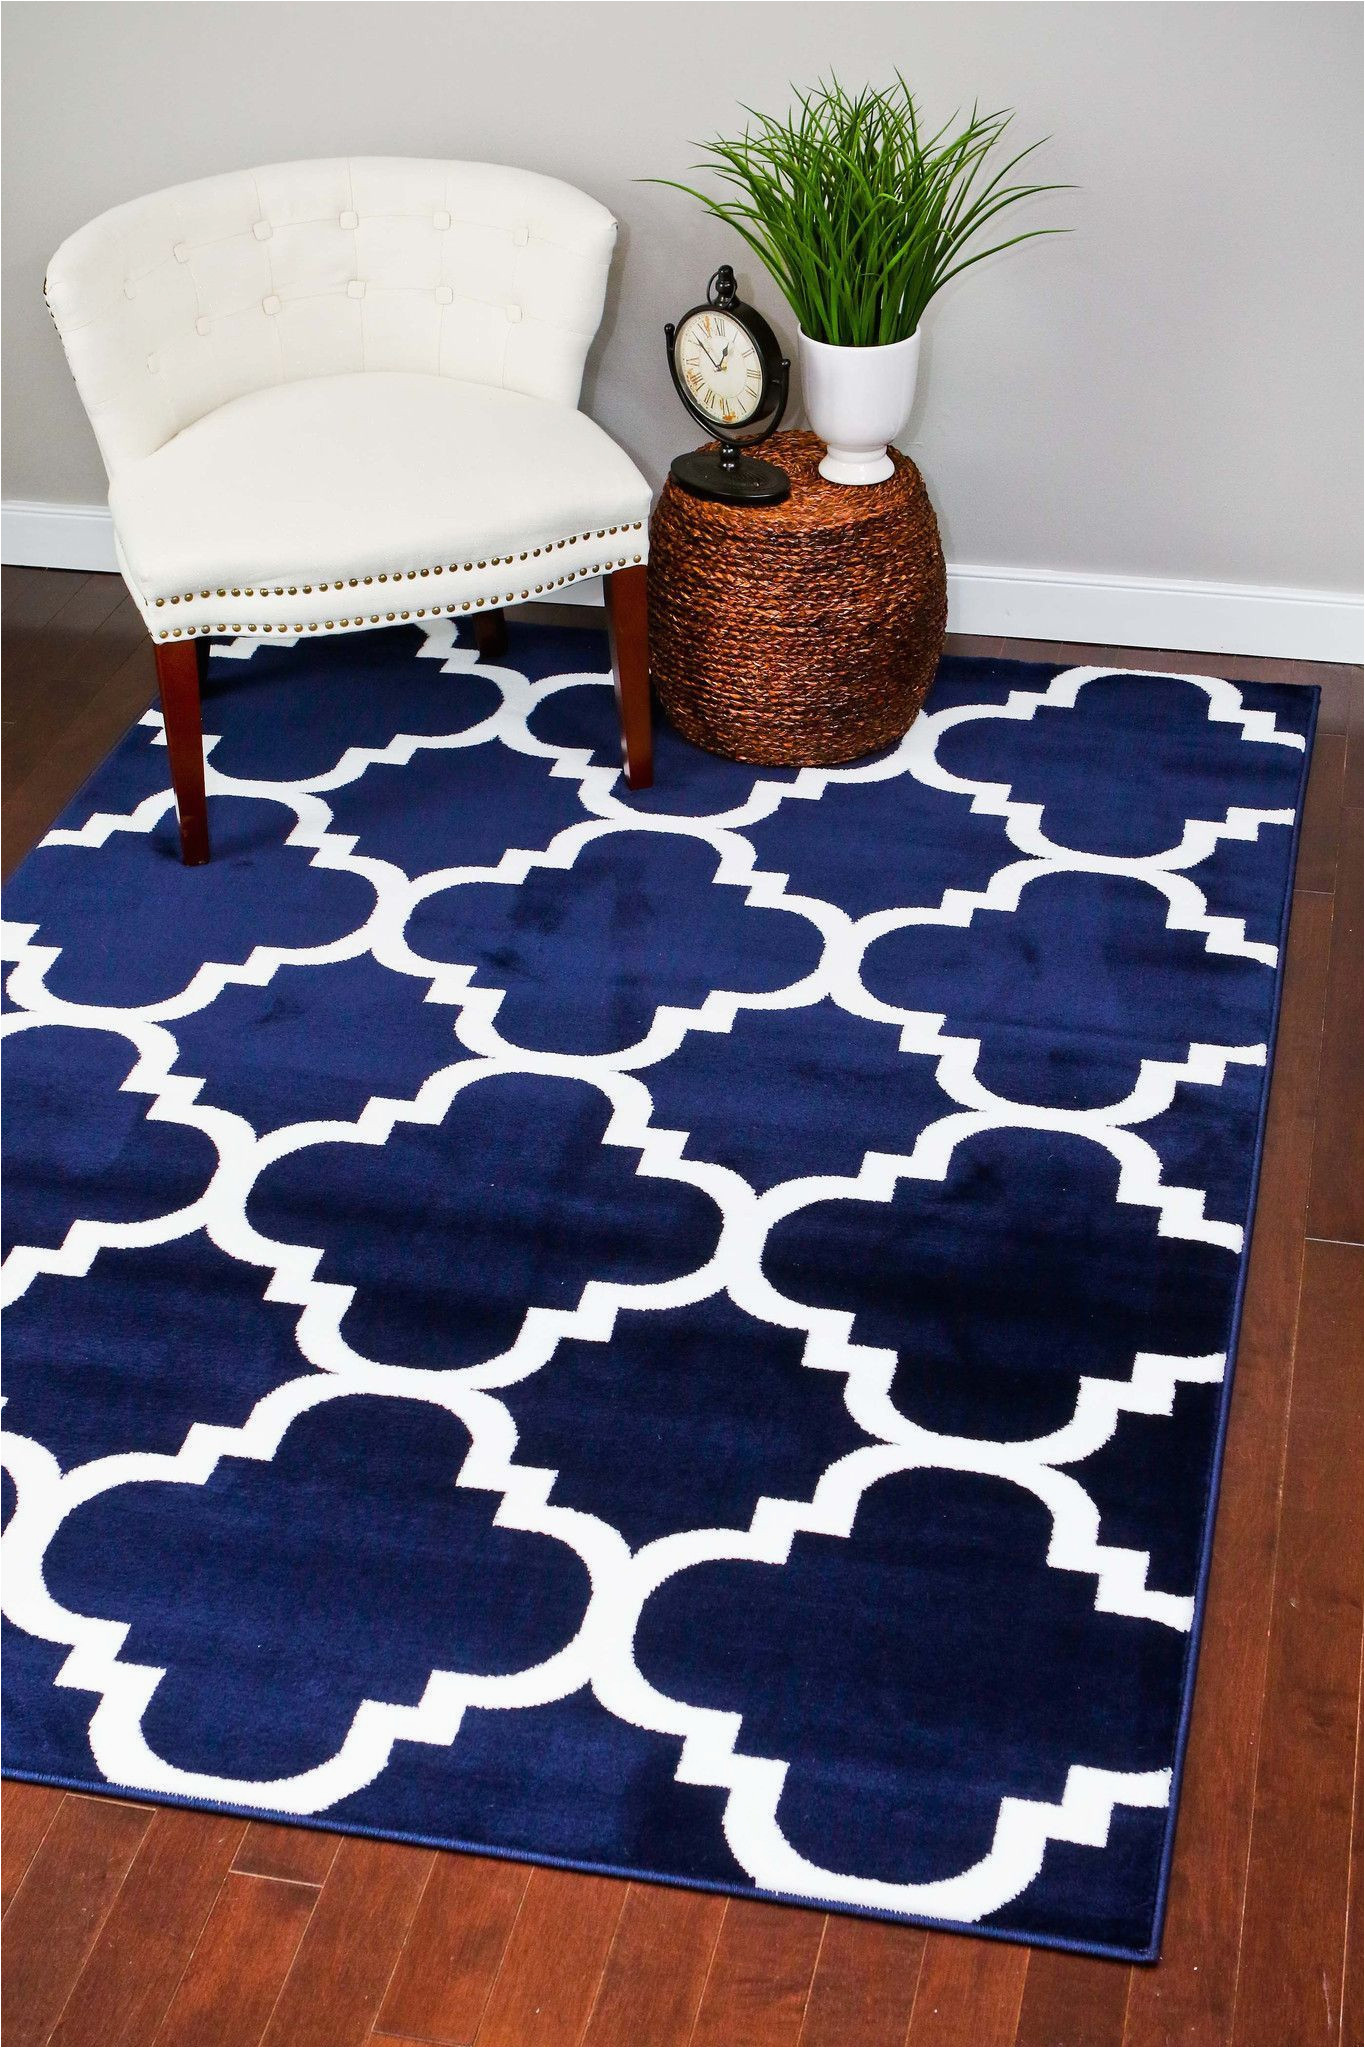 Navy Blue area Rugs Contemporary 4518 Navy Blue Blue Living Room, Home Decor, Rugs In Living Room